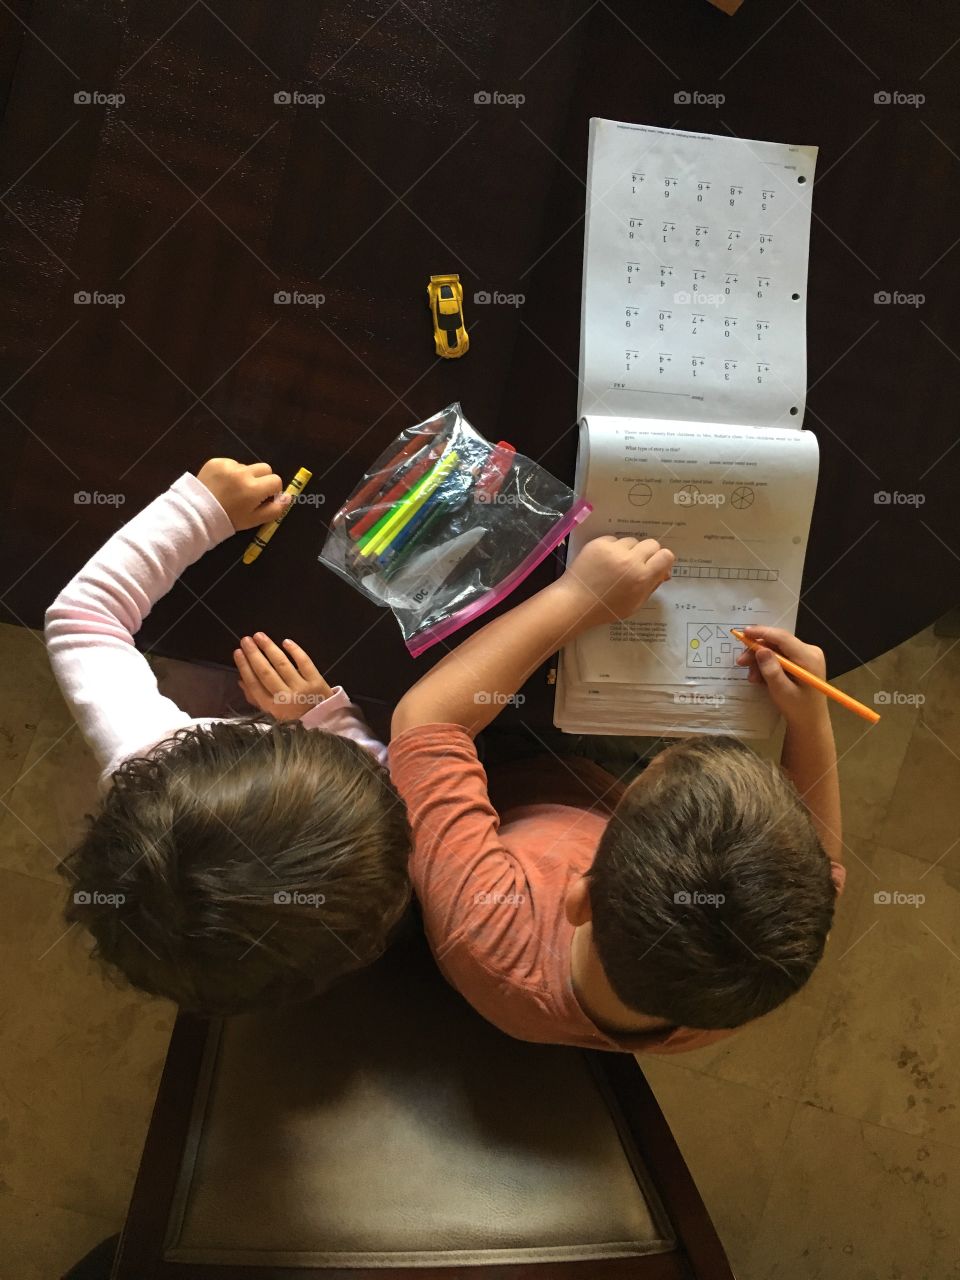 The boy in the picture is doing his Math and graciously let his younger cousin to watch him while at work. So not only he is learning but his little cousin too. 